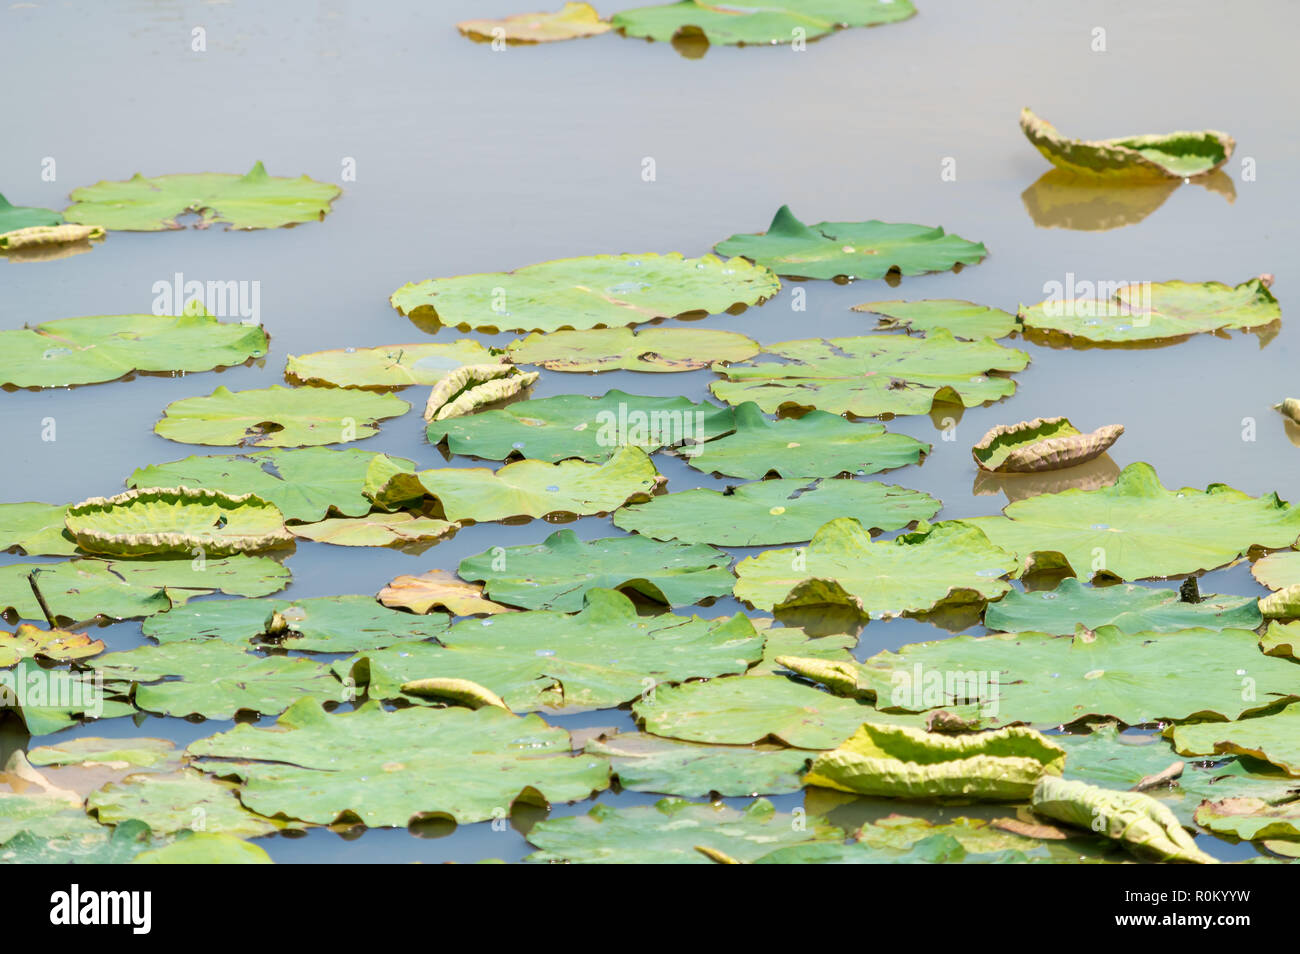 Green Leaves floating on a Small Pond Stock Photo